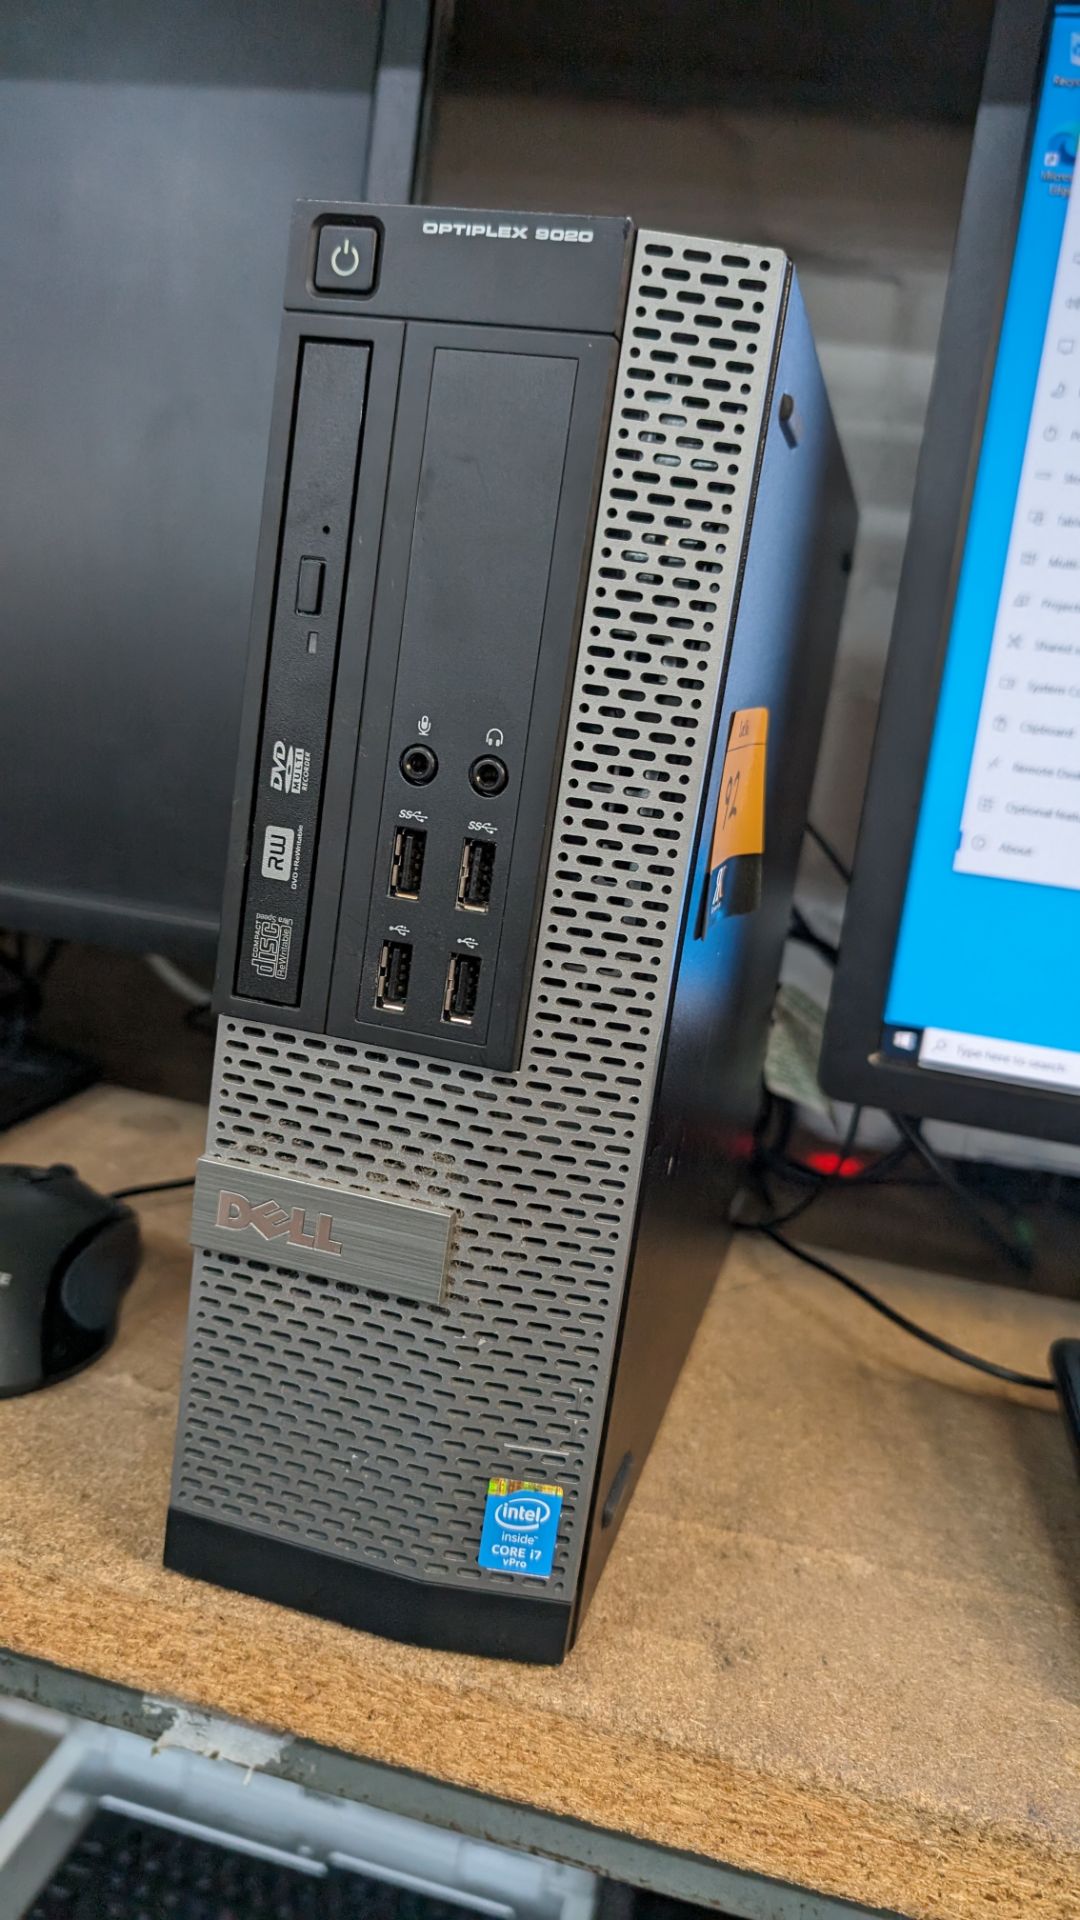 Dell Optiplex 9020 compact tower computer with Intel i7 vPro processor, including widescreen monitor - Image 14 of 18